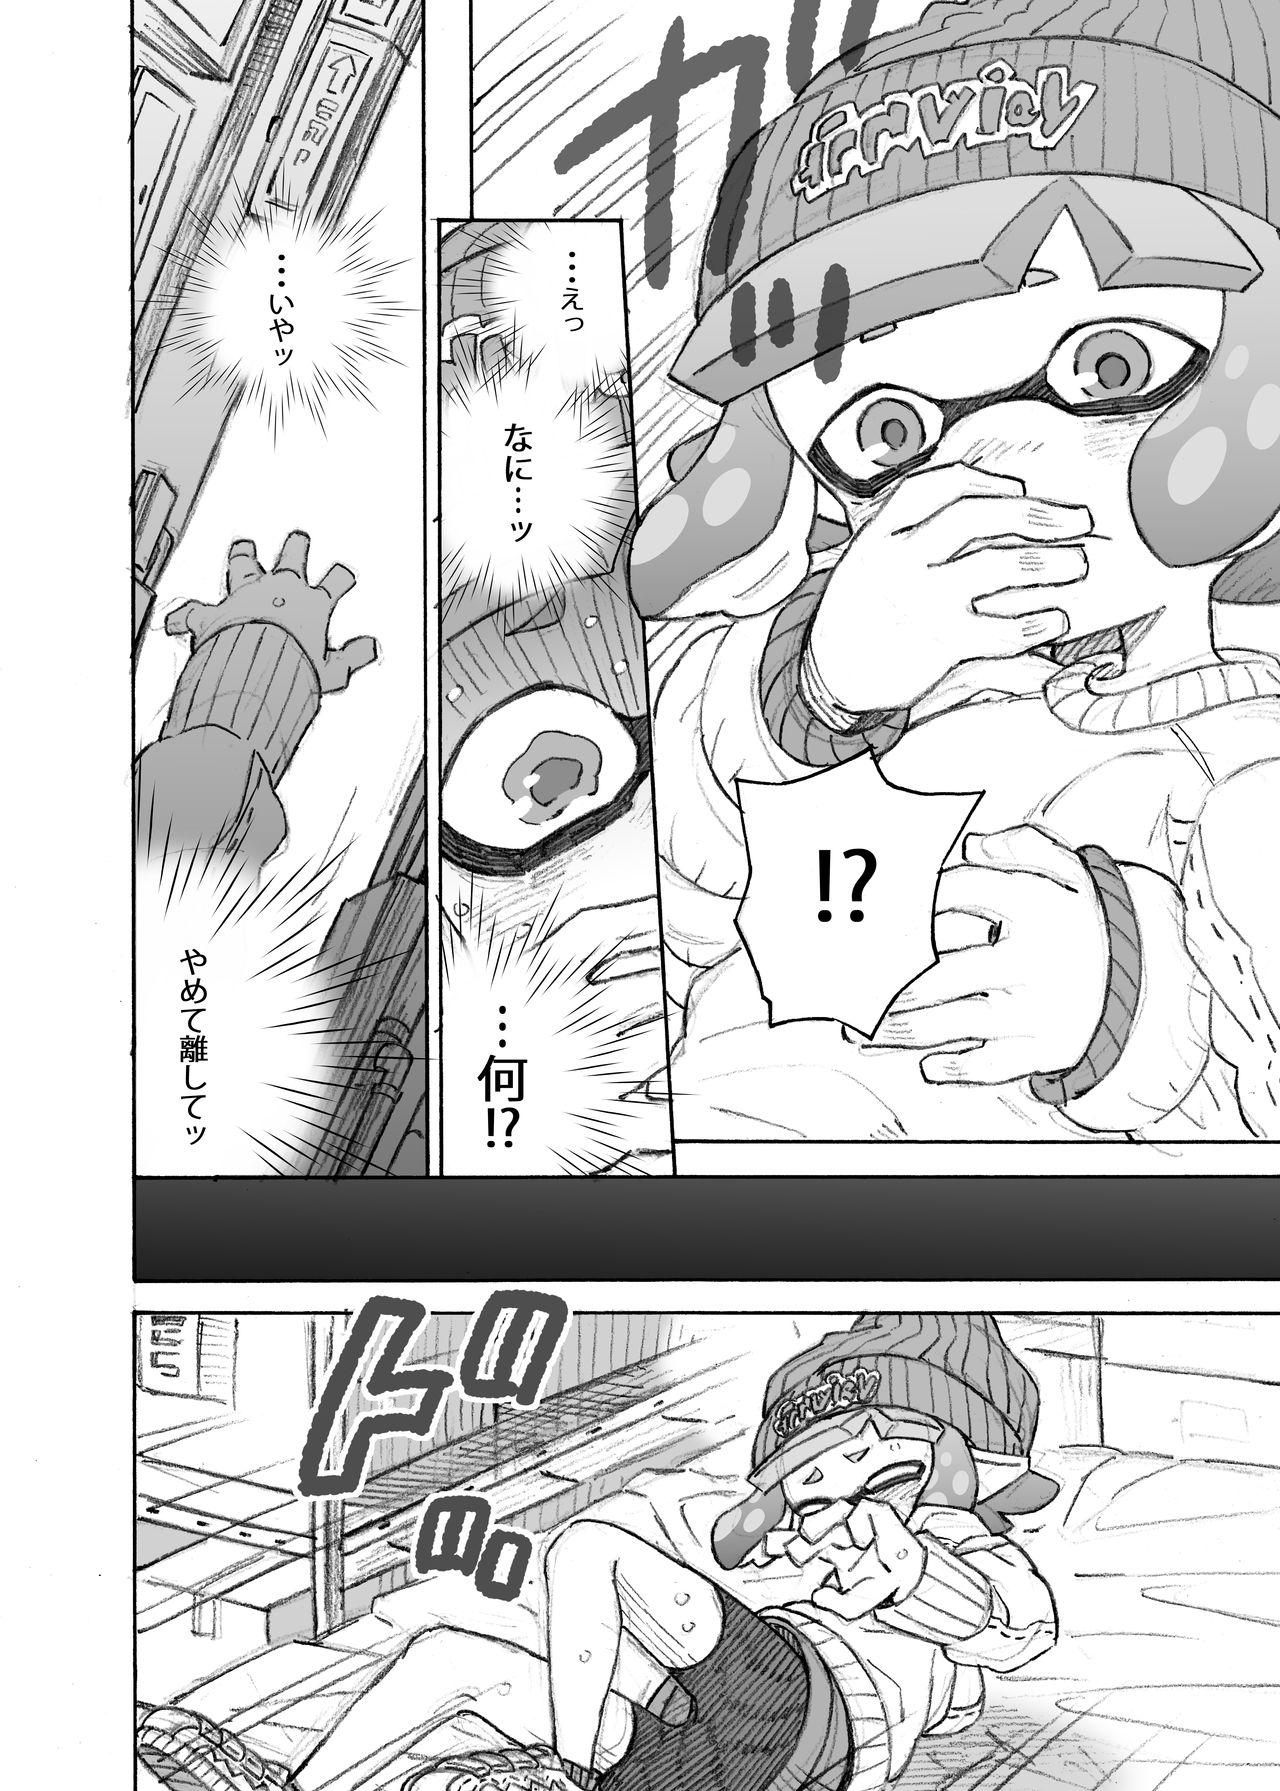 Outdoors Let's make that anxious daughter a mama - Splatoon Celebrity Sex Scene - Page 8